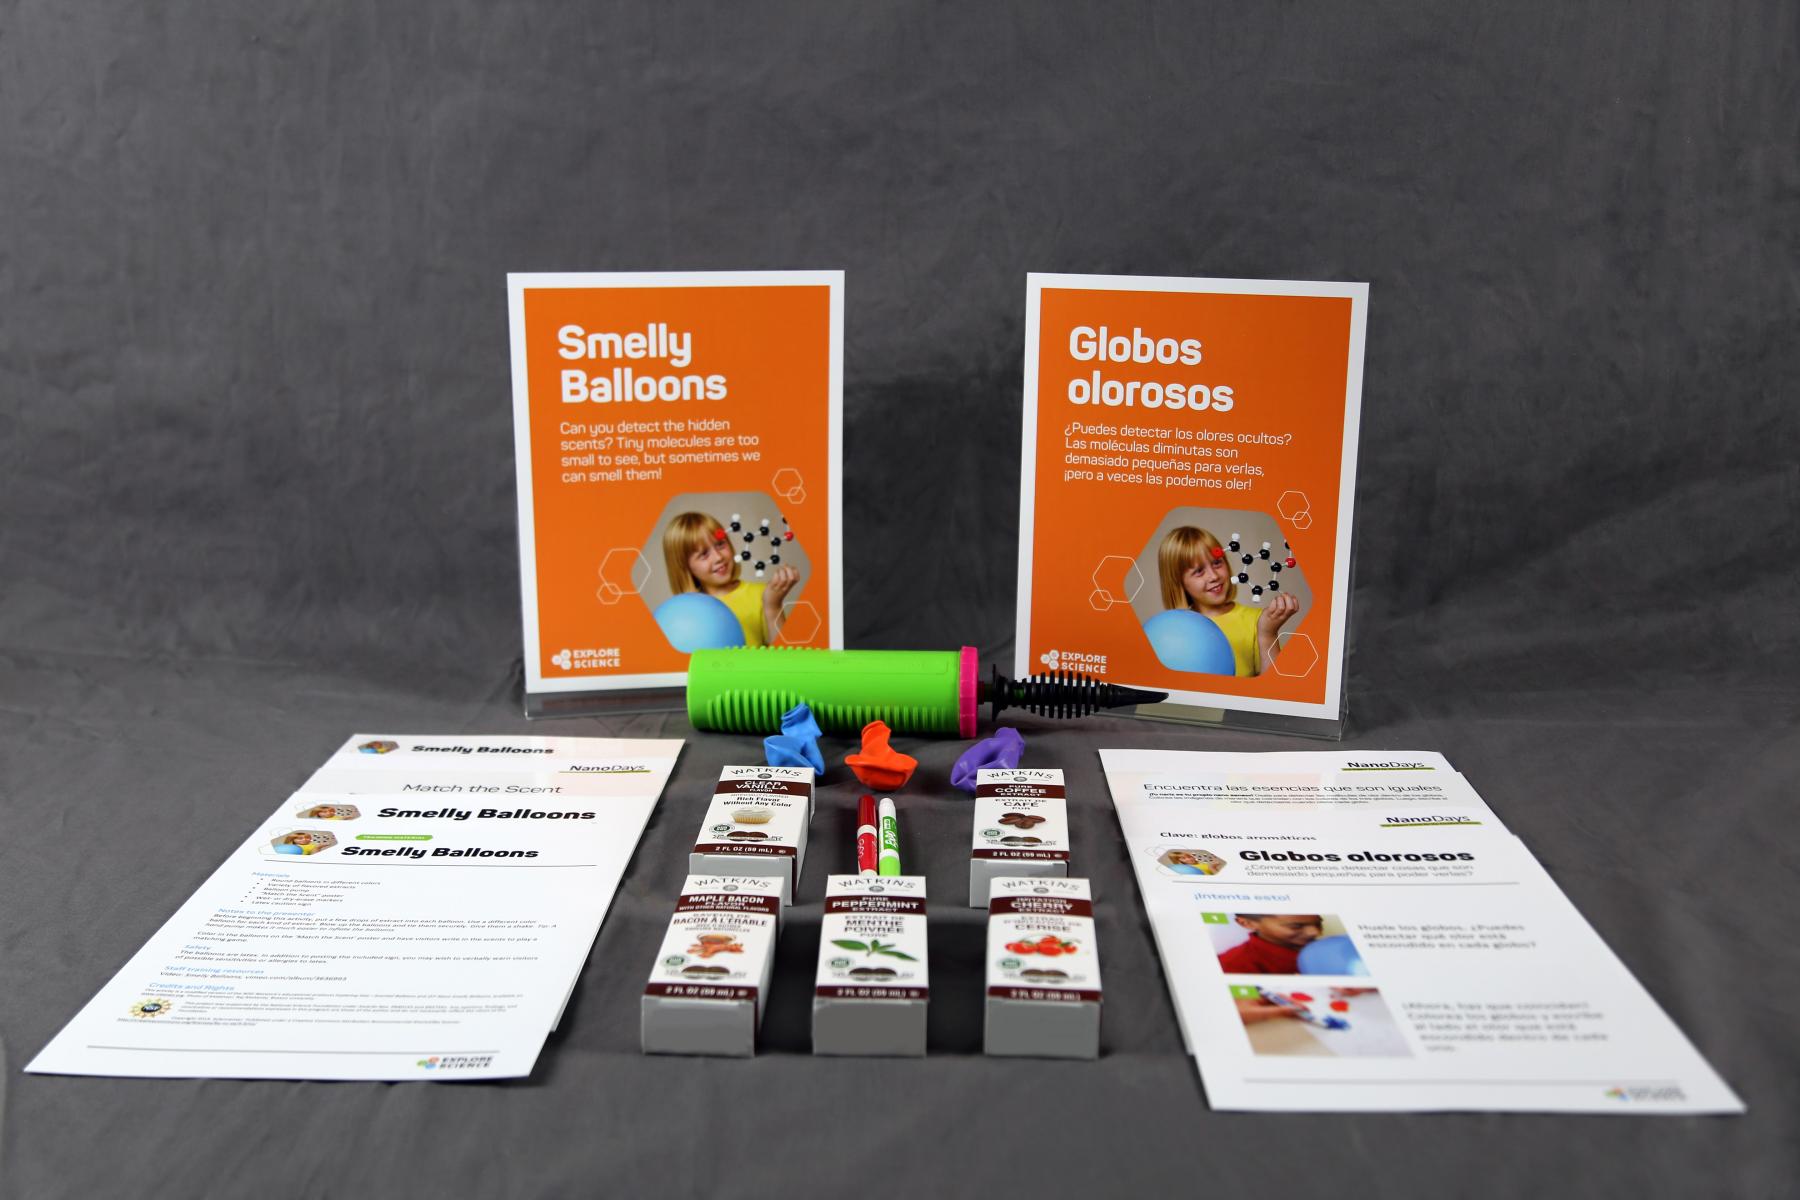 A layout of the components to the Smelly Balloons activity, including balloons, scented oils, worksheets and more